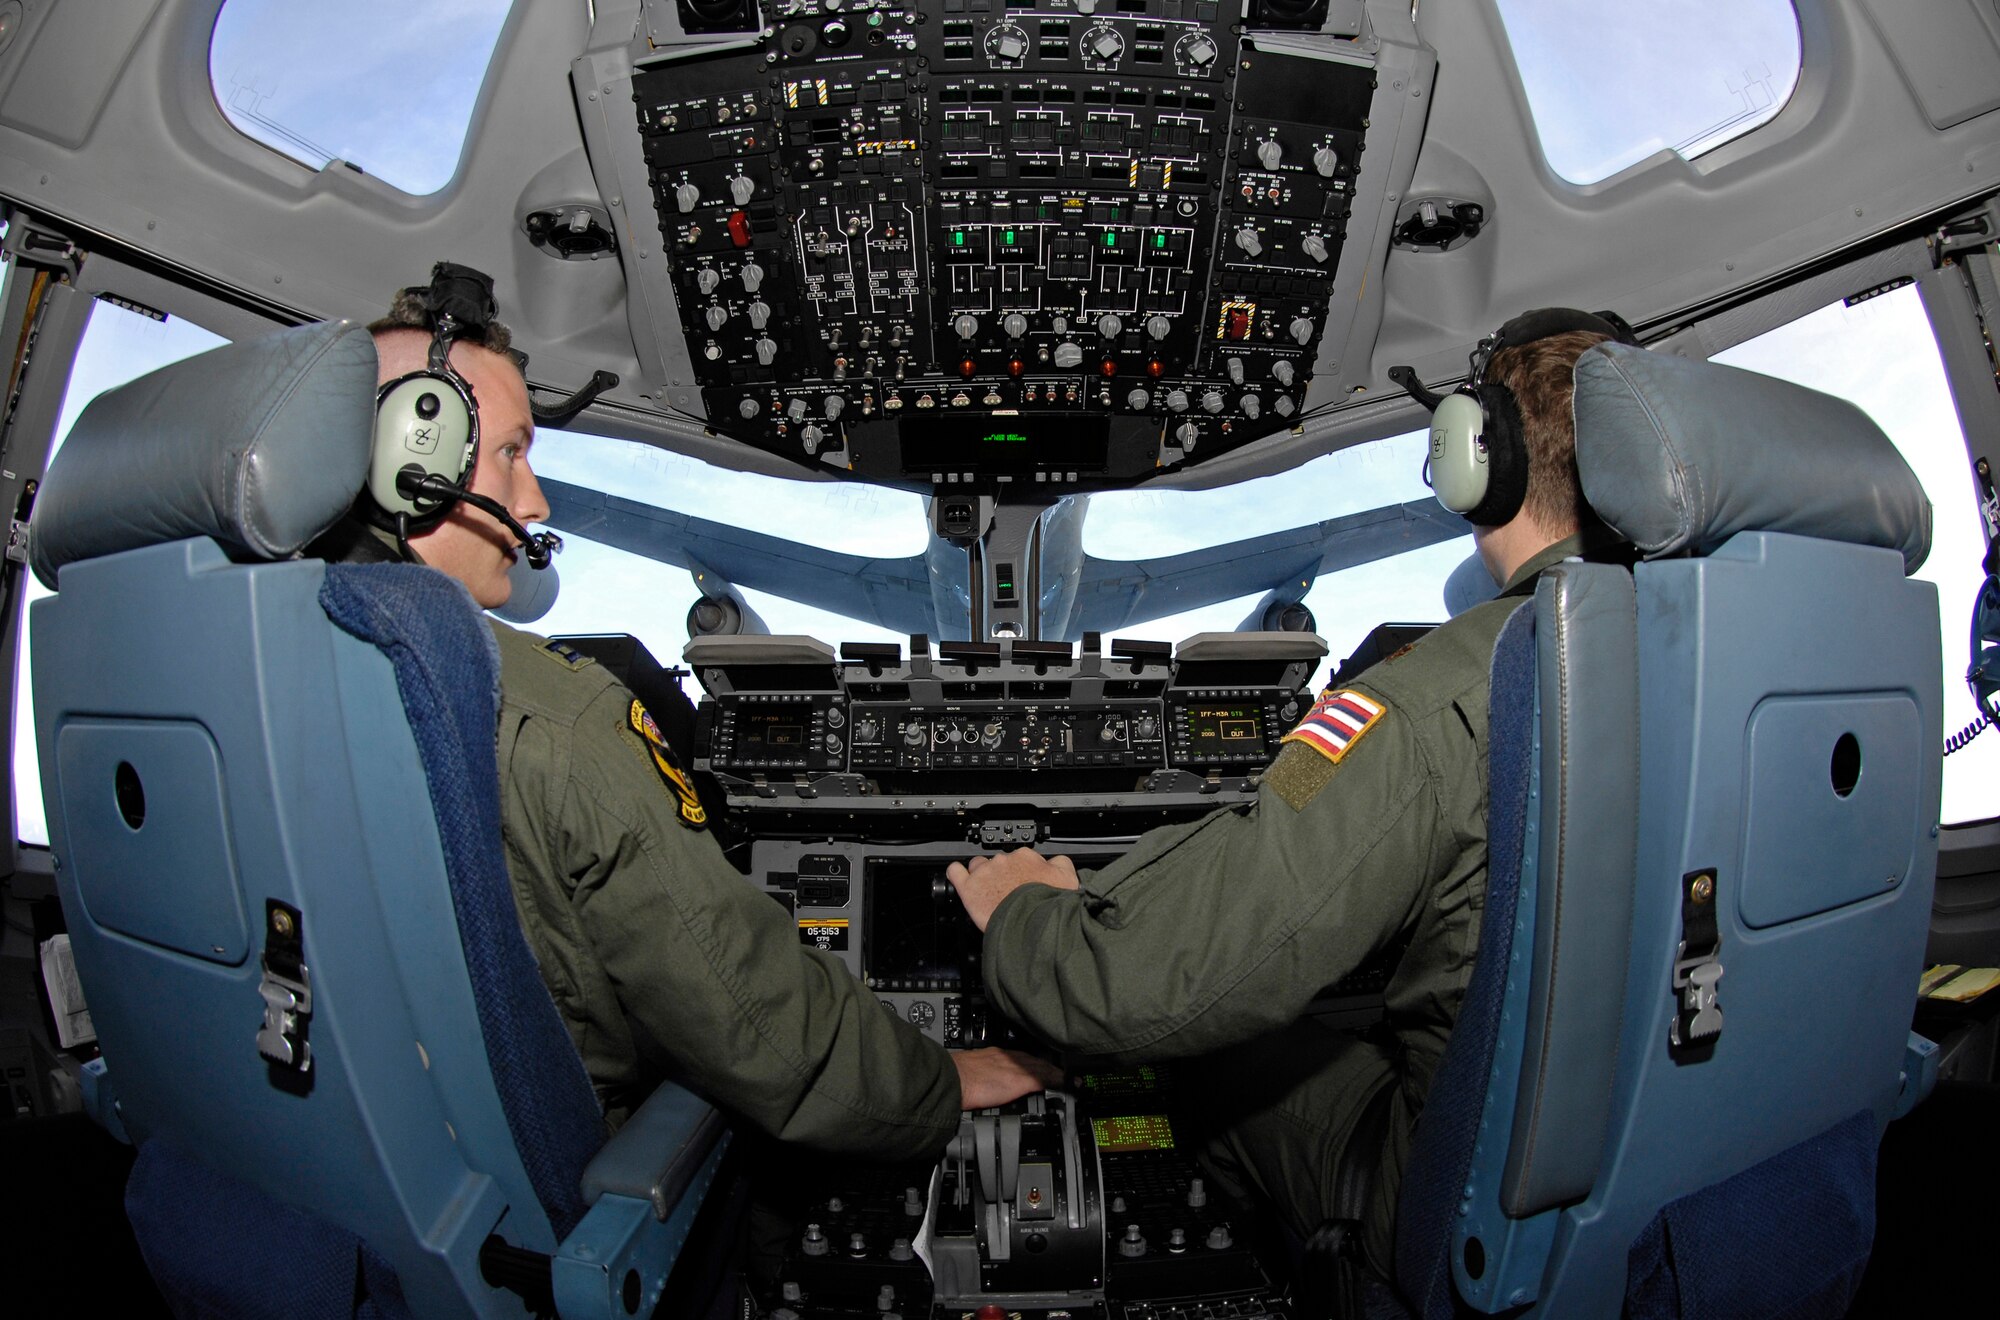 Capt. John Tucker and Maj. Anthony Davis, both assigned to the Hawaii Air National Guard's 204th Airlift Squadron at Hickam Air Force Base, Hawaii, take fuel for their C-17 Globemaster III from a KC-135 from the 909th Air Refueling Squadron from Kadena Air Base, Japan, while en route to China May 17, 2008. A U.S. Pacific Command mission employed one C-17 from the 15th Airlift Wing at Hickam and another from the 3rd Wing at Elmendorf Air Force Base, Alaska, to deliver nearly 200,000 pounds of cargo in the wake of a devastating earthquake. (US Air Force photo/Tech. Sgt. Chris Vadnais)